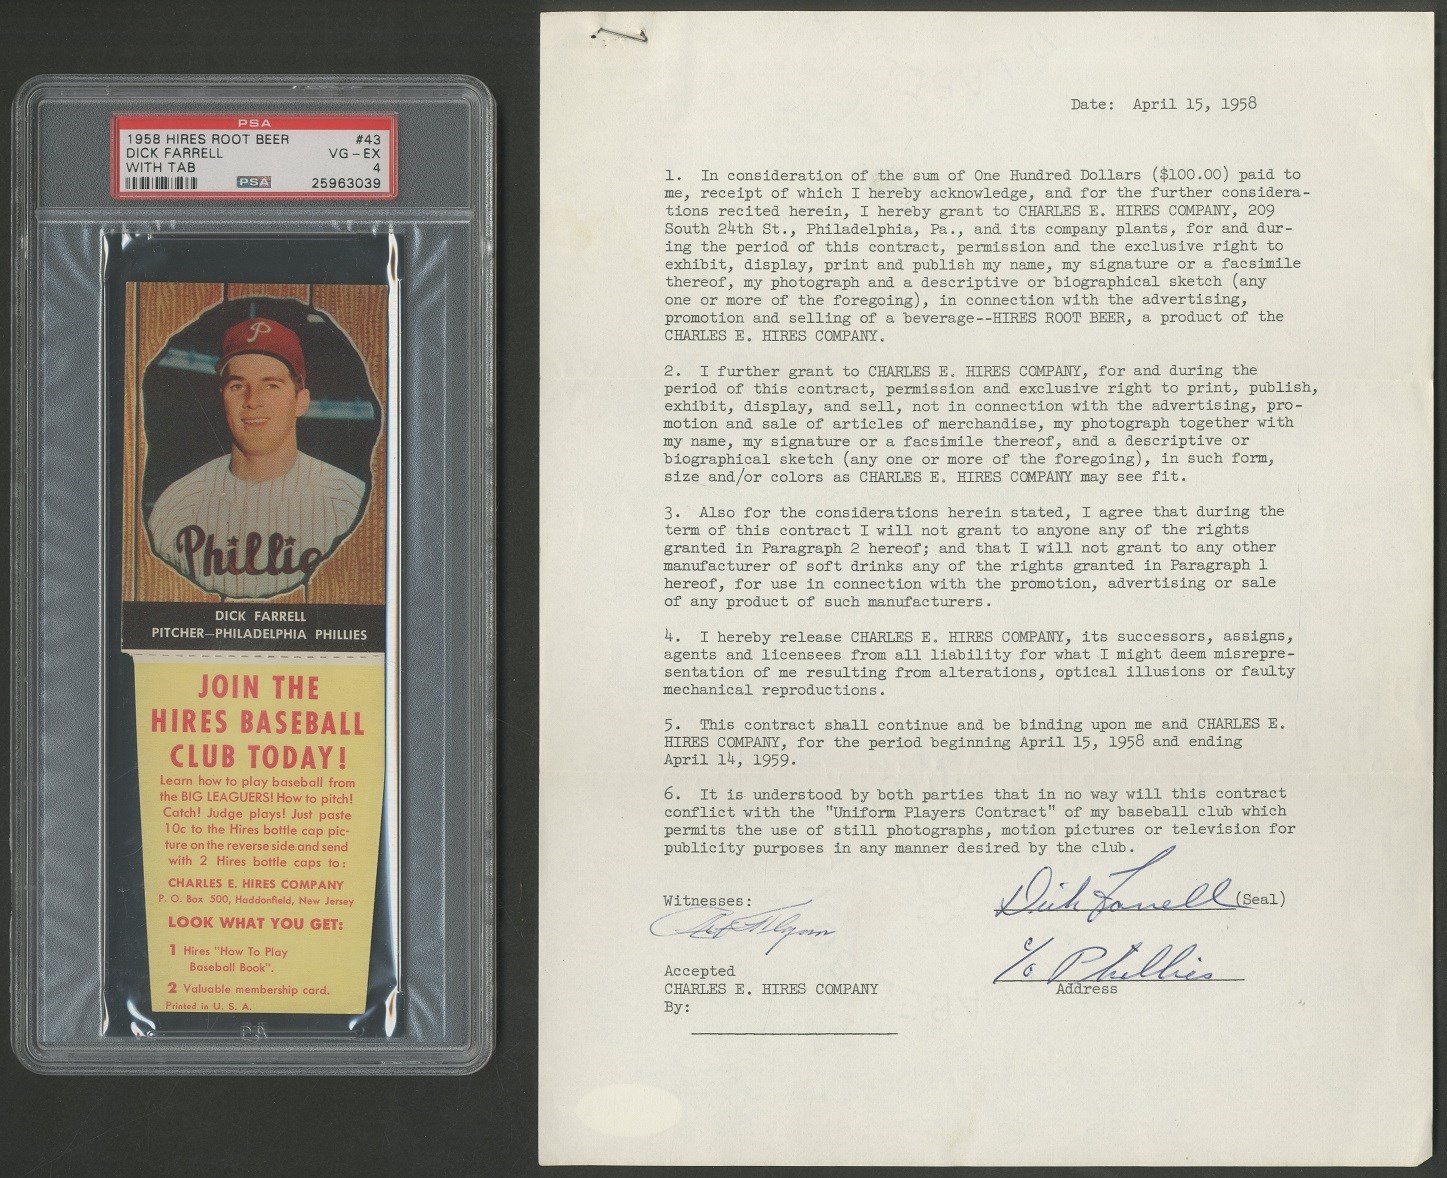 - Dick Farrell Signed Contract for 1958 Hires Root Beer and PSA 4 1958 Hires Root Beer with Tab